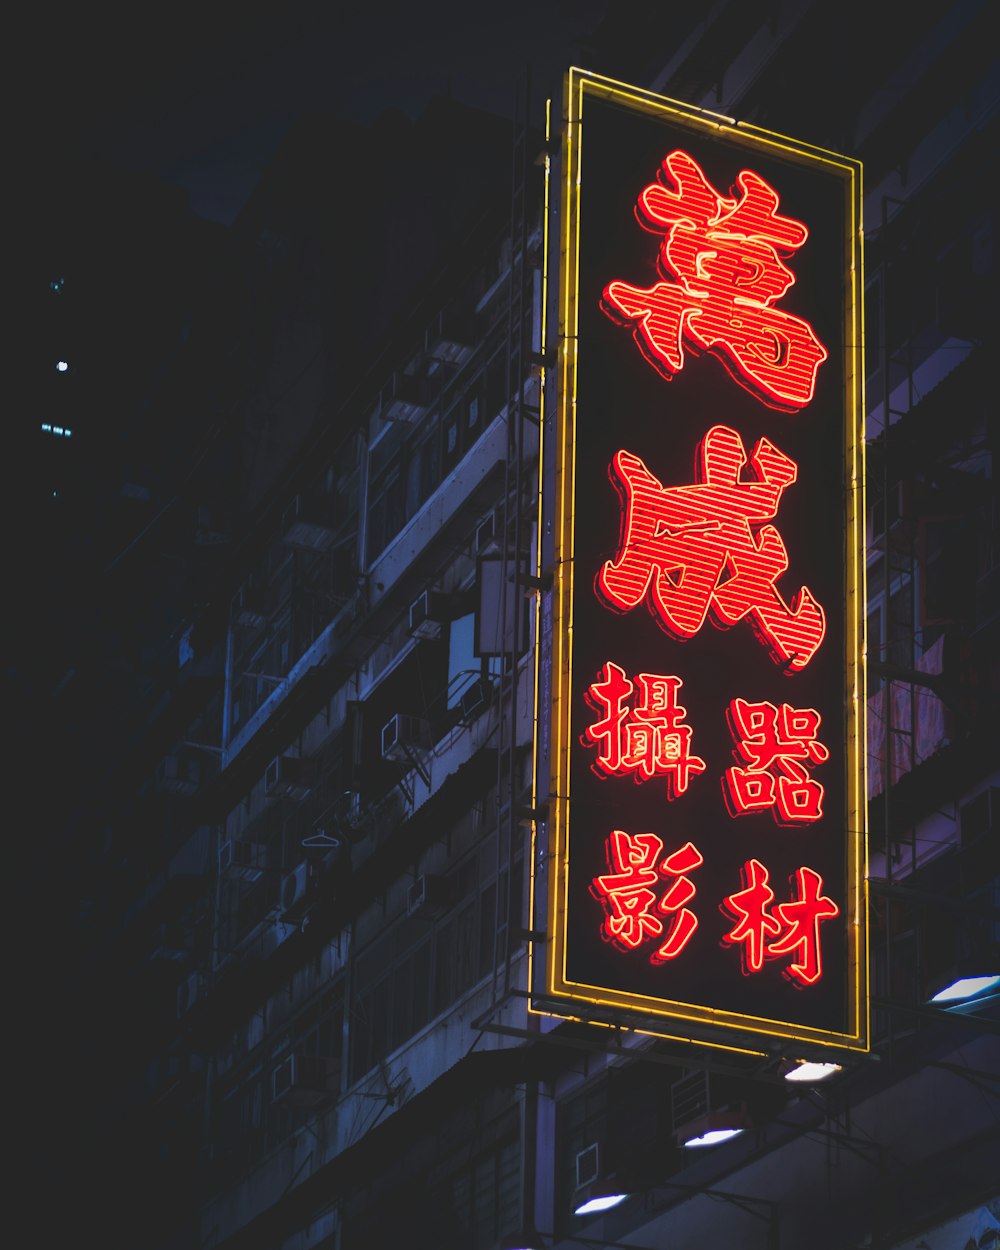 black and red signage with Kanji text